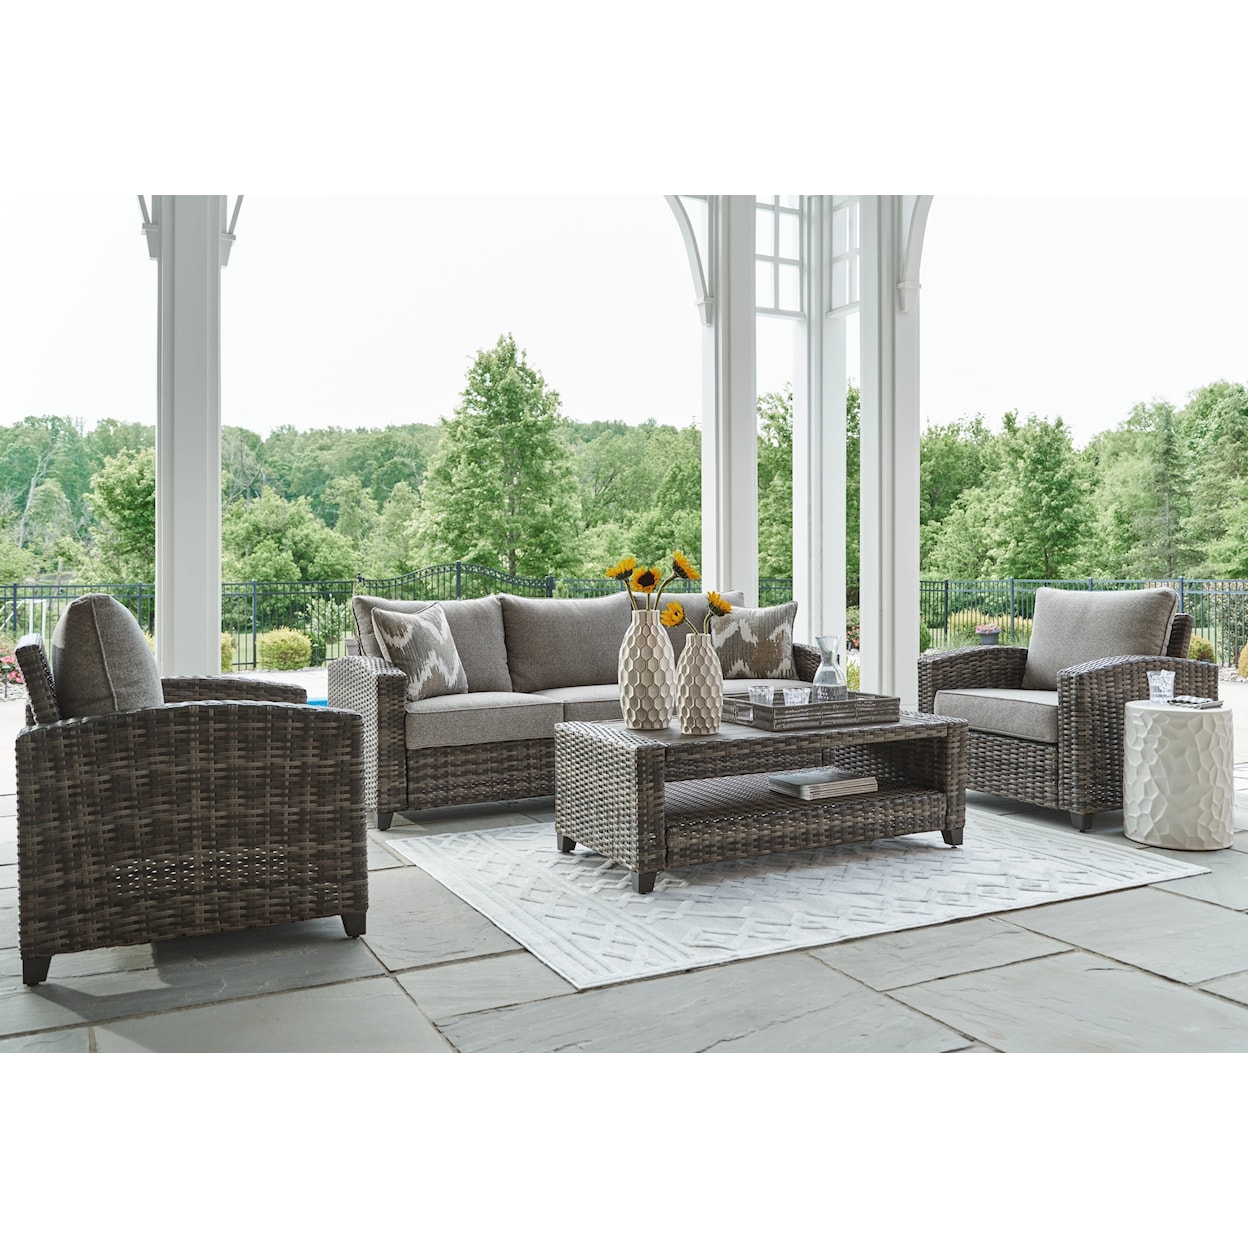 Signature Design by Ashley Oasis Court Outdoor Sofa/Chairs/Table Set (Set of 4)